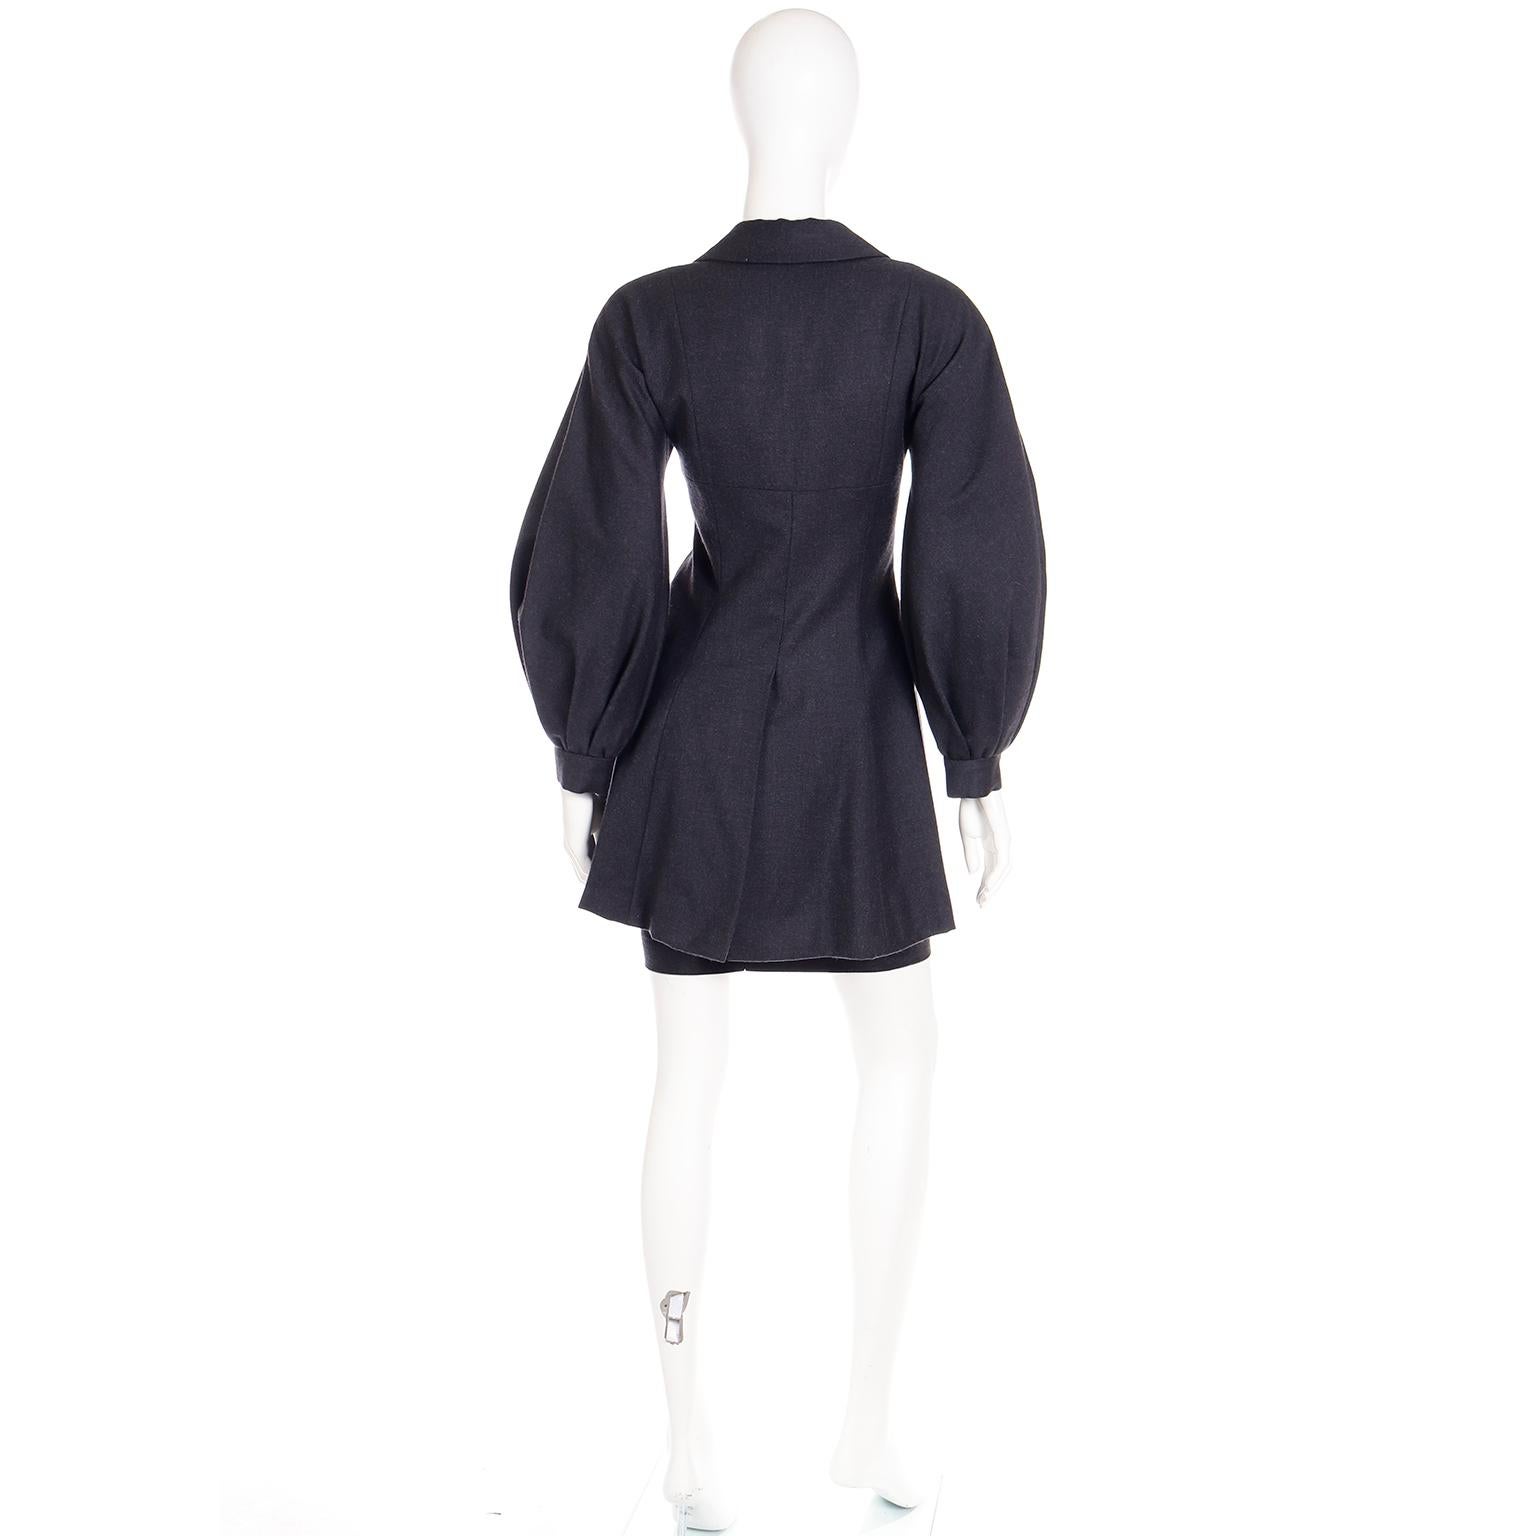 Women's 1990s Vintage Christian Dior Demi Couture Numbered Peplum Jacket and Skirt Suit For Sale